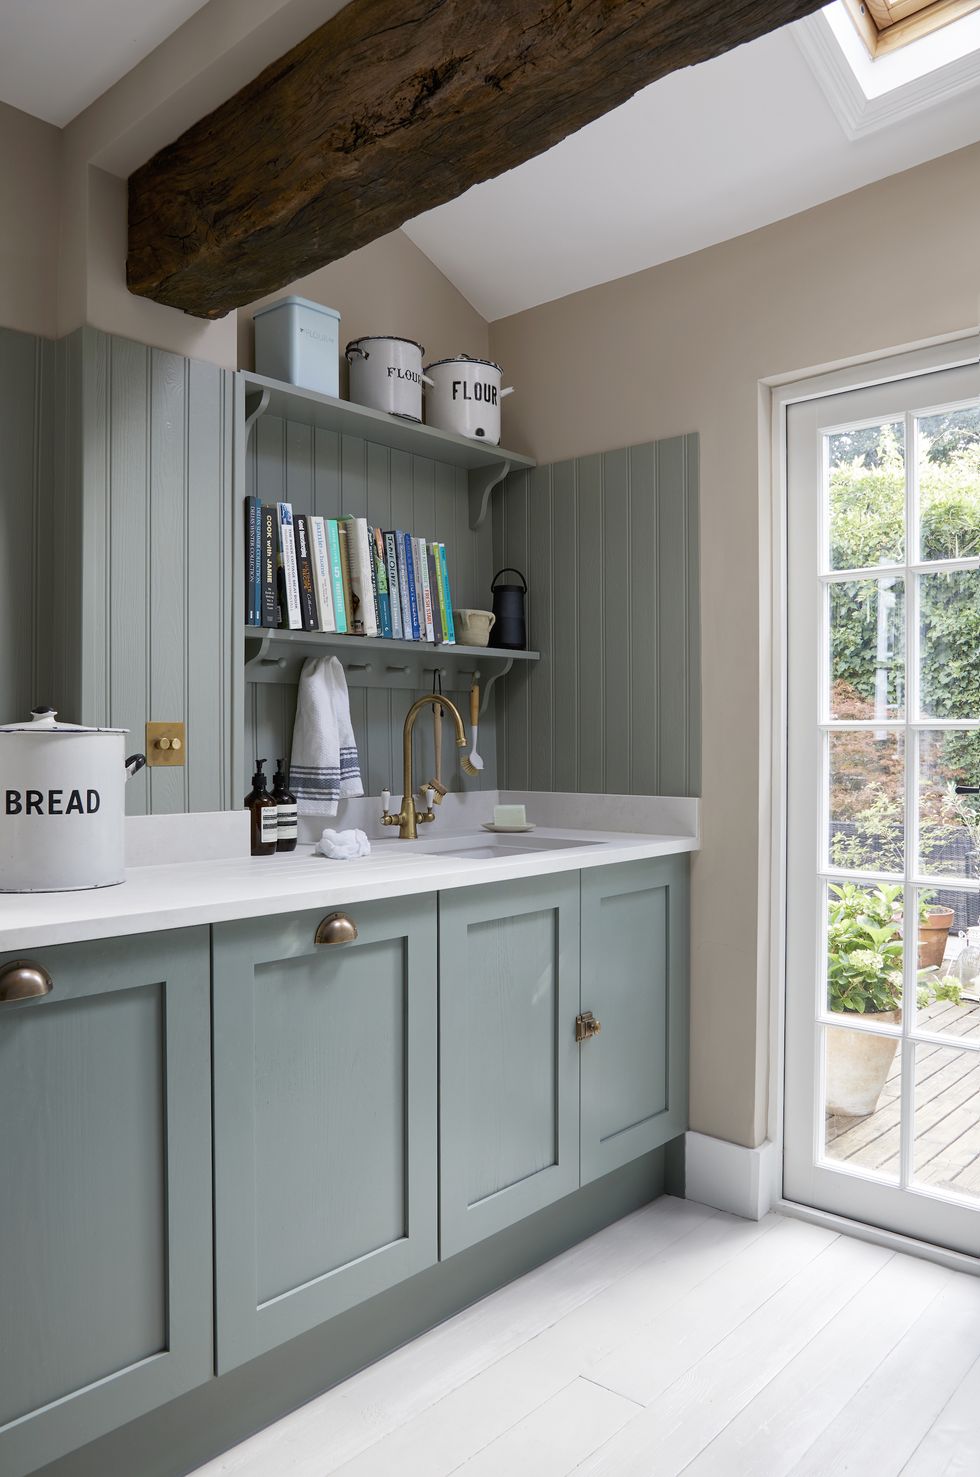 'My New Kitchen Feels Like It Has Been Here For Years'